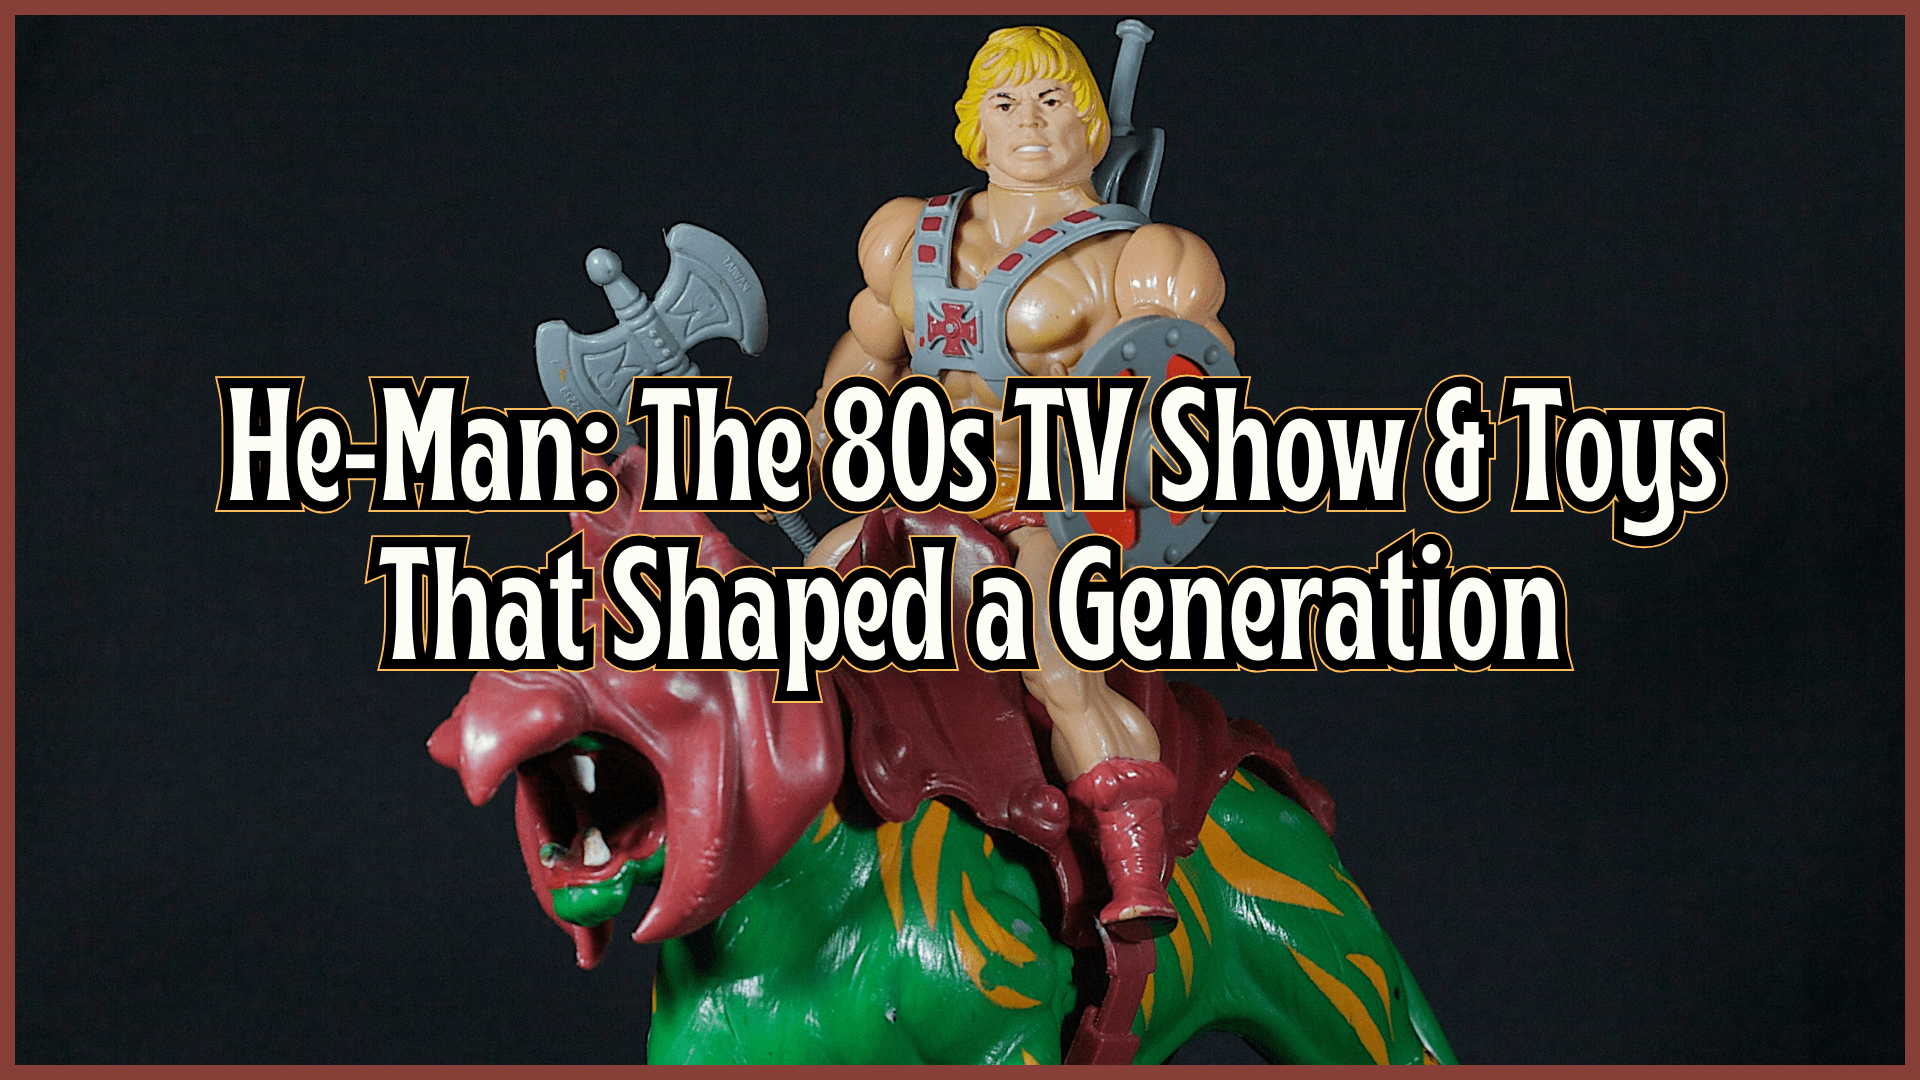 He-Man: The 80s TV Show & Toys That Shaped a Generation